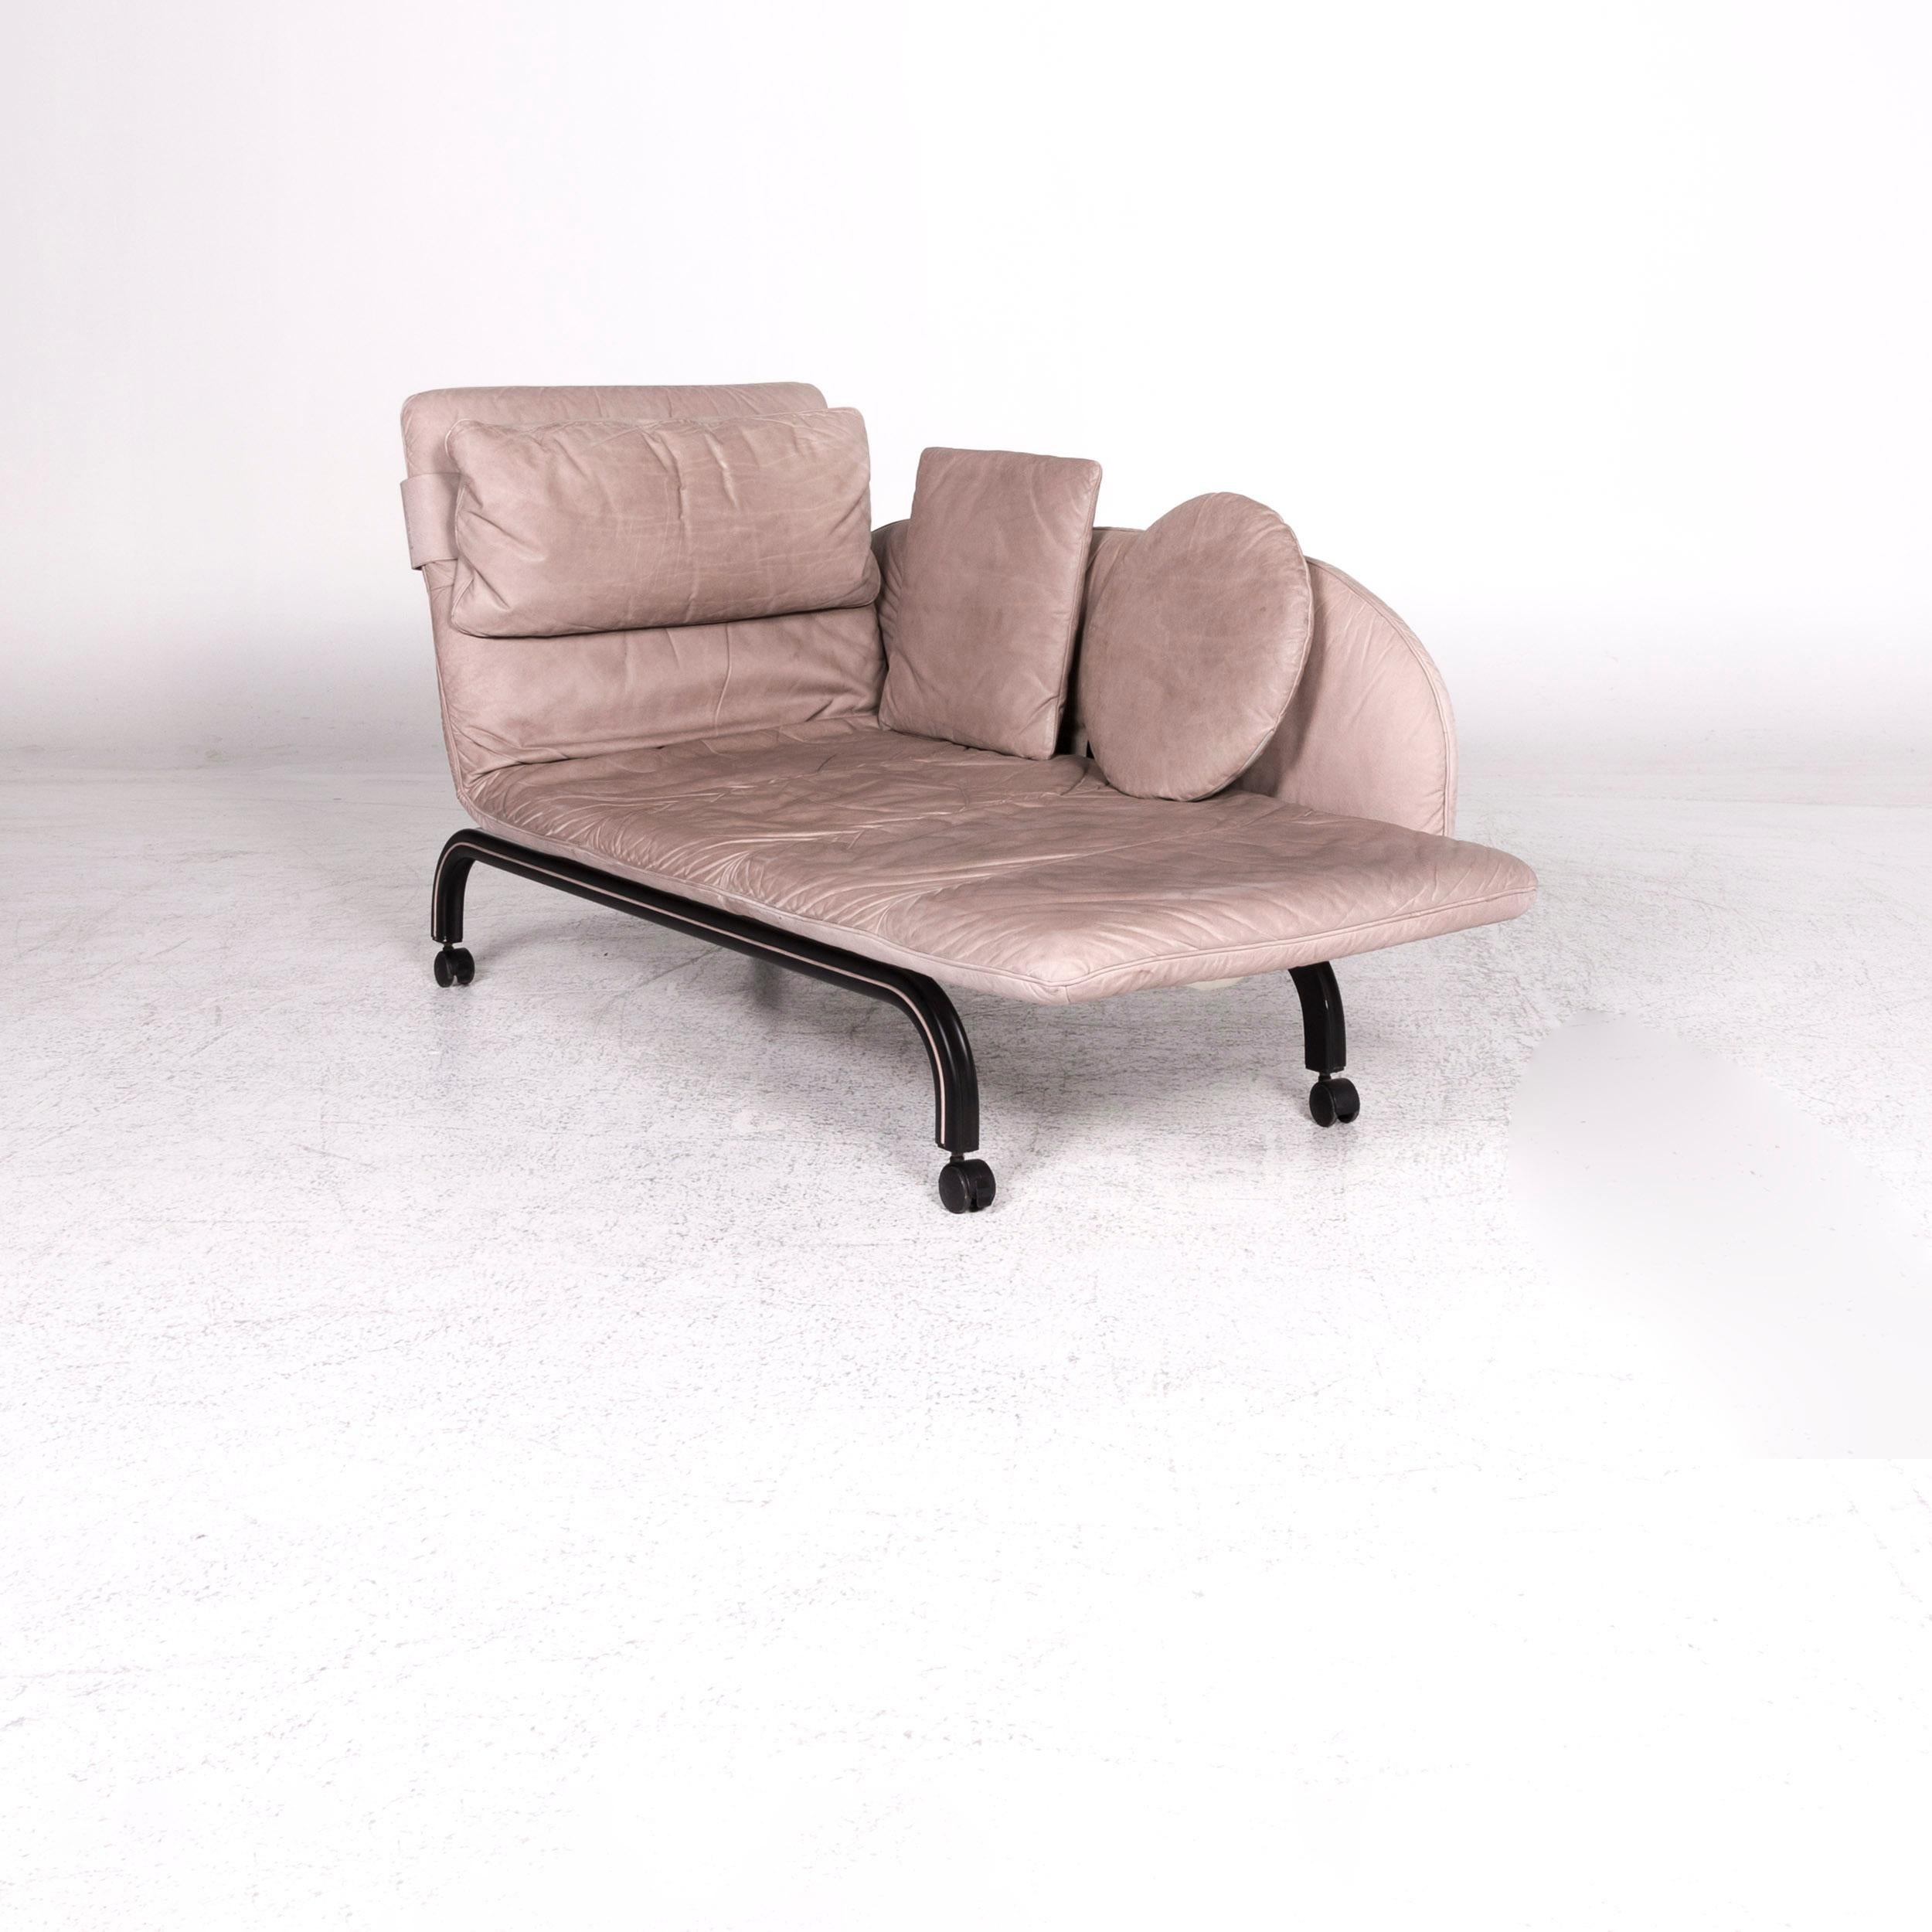 We bring to you an Interprofil Beo Anilin leather lounger gray relax function.

 Product measurements in centimeters:
 
 Depth: 80
Width: 176
Height: 89
Seat-height: 37
Rest-height: 69
Seat-depth: 69
Seat-width: 138
Back-height: 51.
 